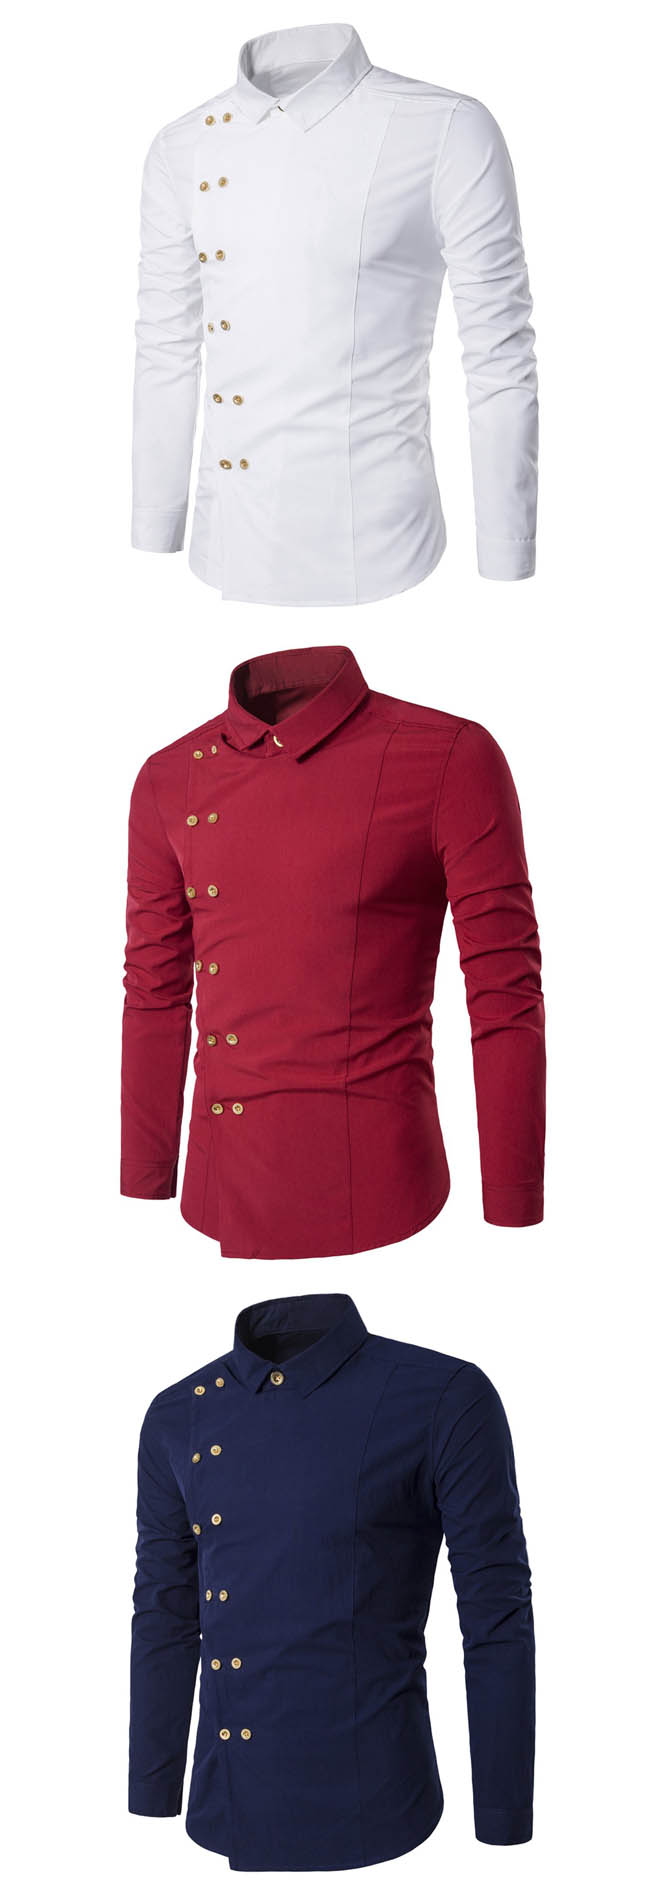 Double Breasted Slim Fit Long Sleeve Shirts for Stylish Men